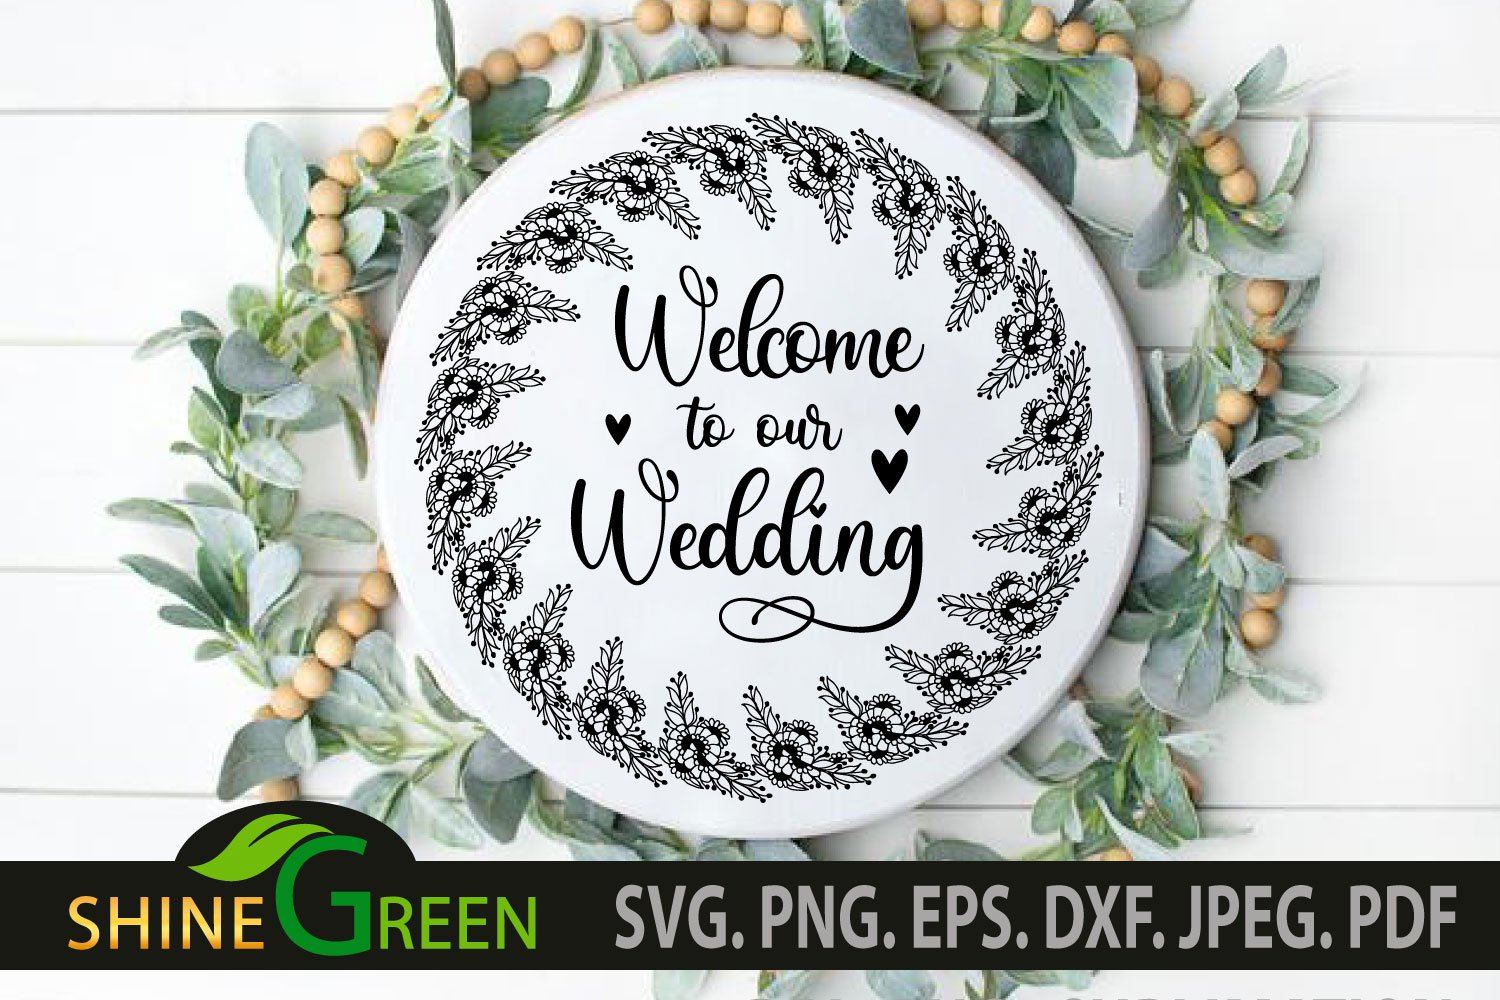 Download Wedding Svg Welcome To Our Wedding Flower Wreath Round Sign So Fontsy